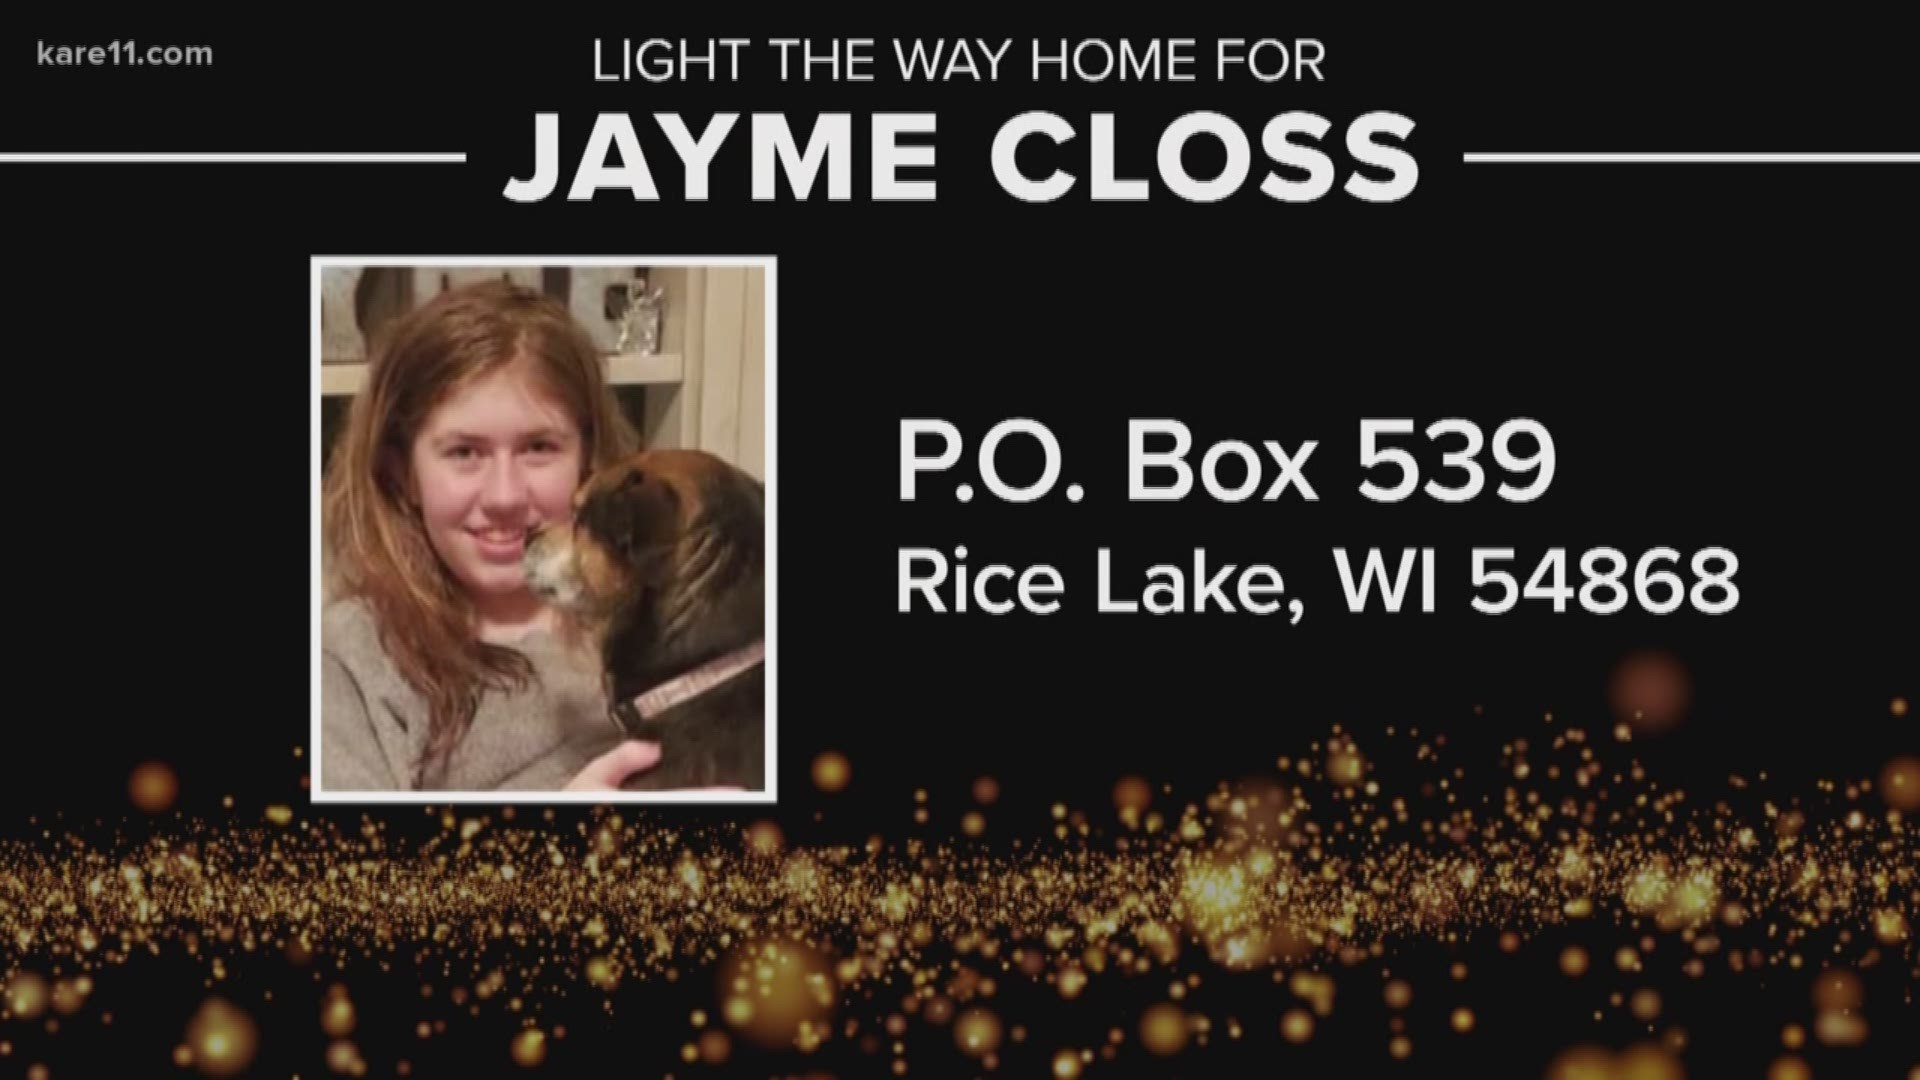 KARE 11's Julie Nelson talked with Jayme's aunt, Jennifer Smith, to find out what people can send to help Jayme through this difficult time. https://kare11.tv/2Fvq8A8